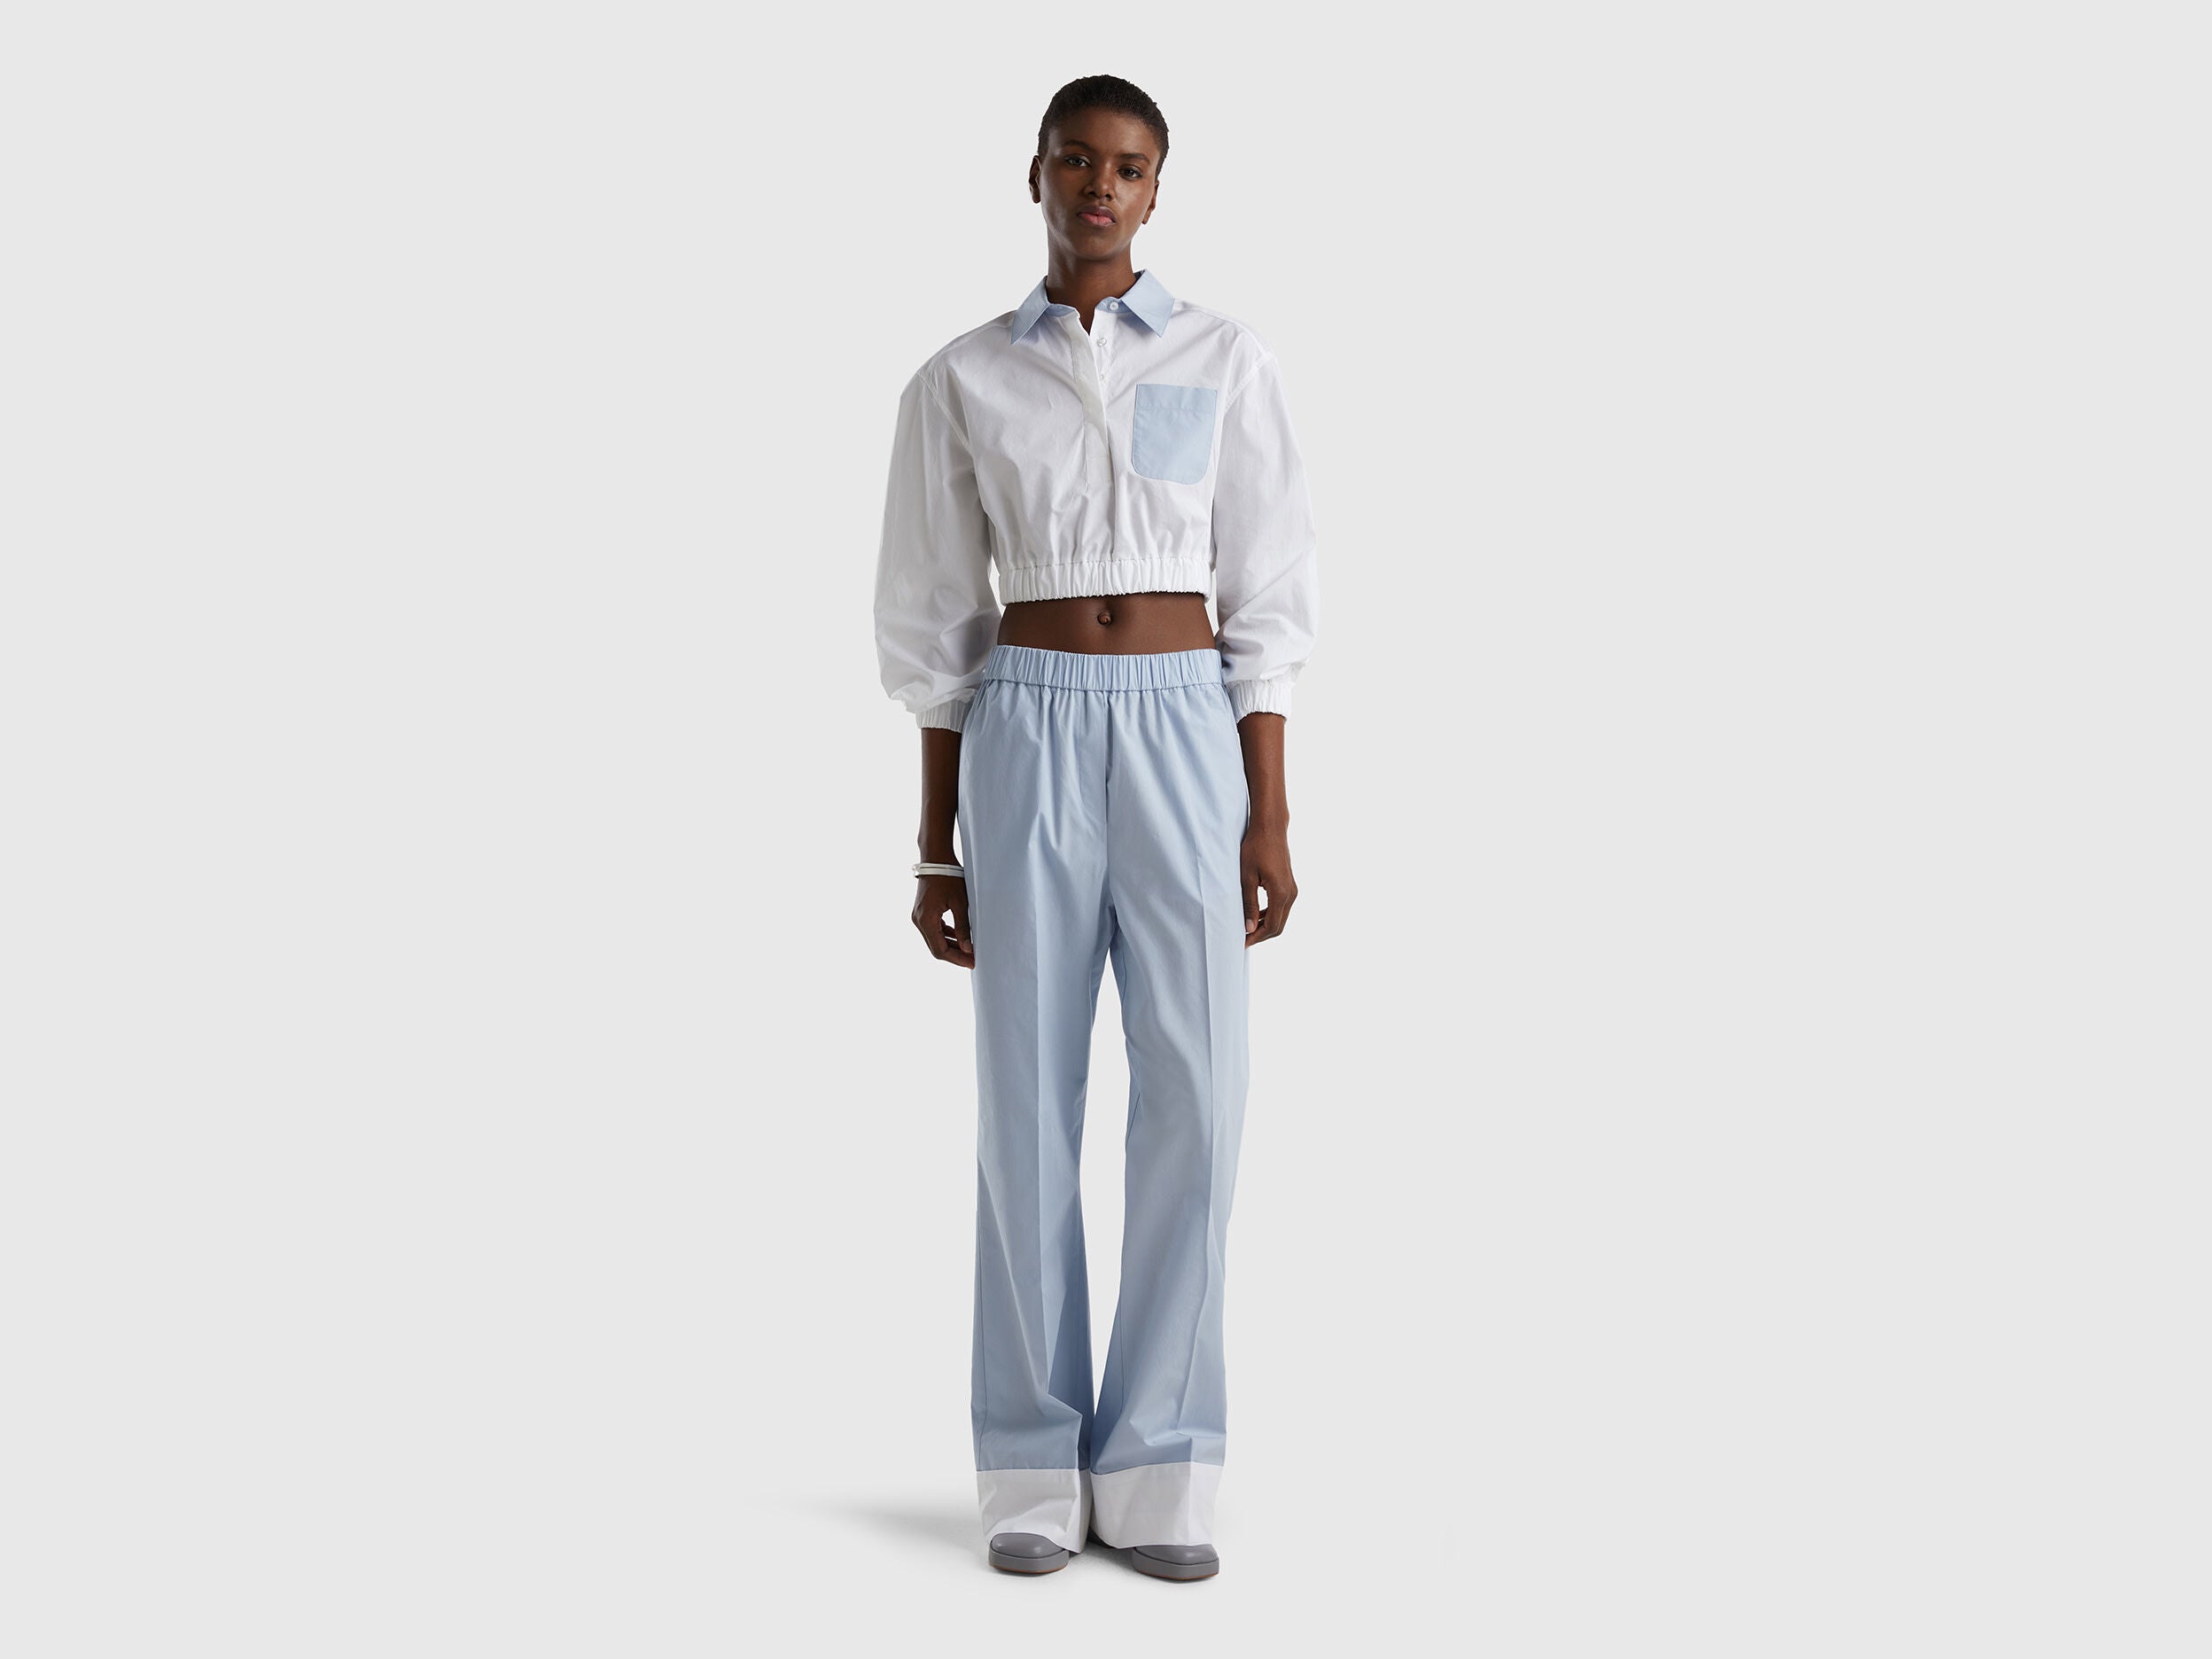 100% Cotton Trousers With Cuffs